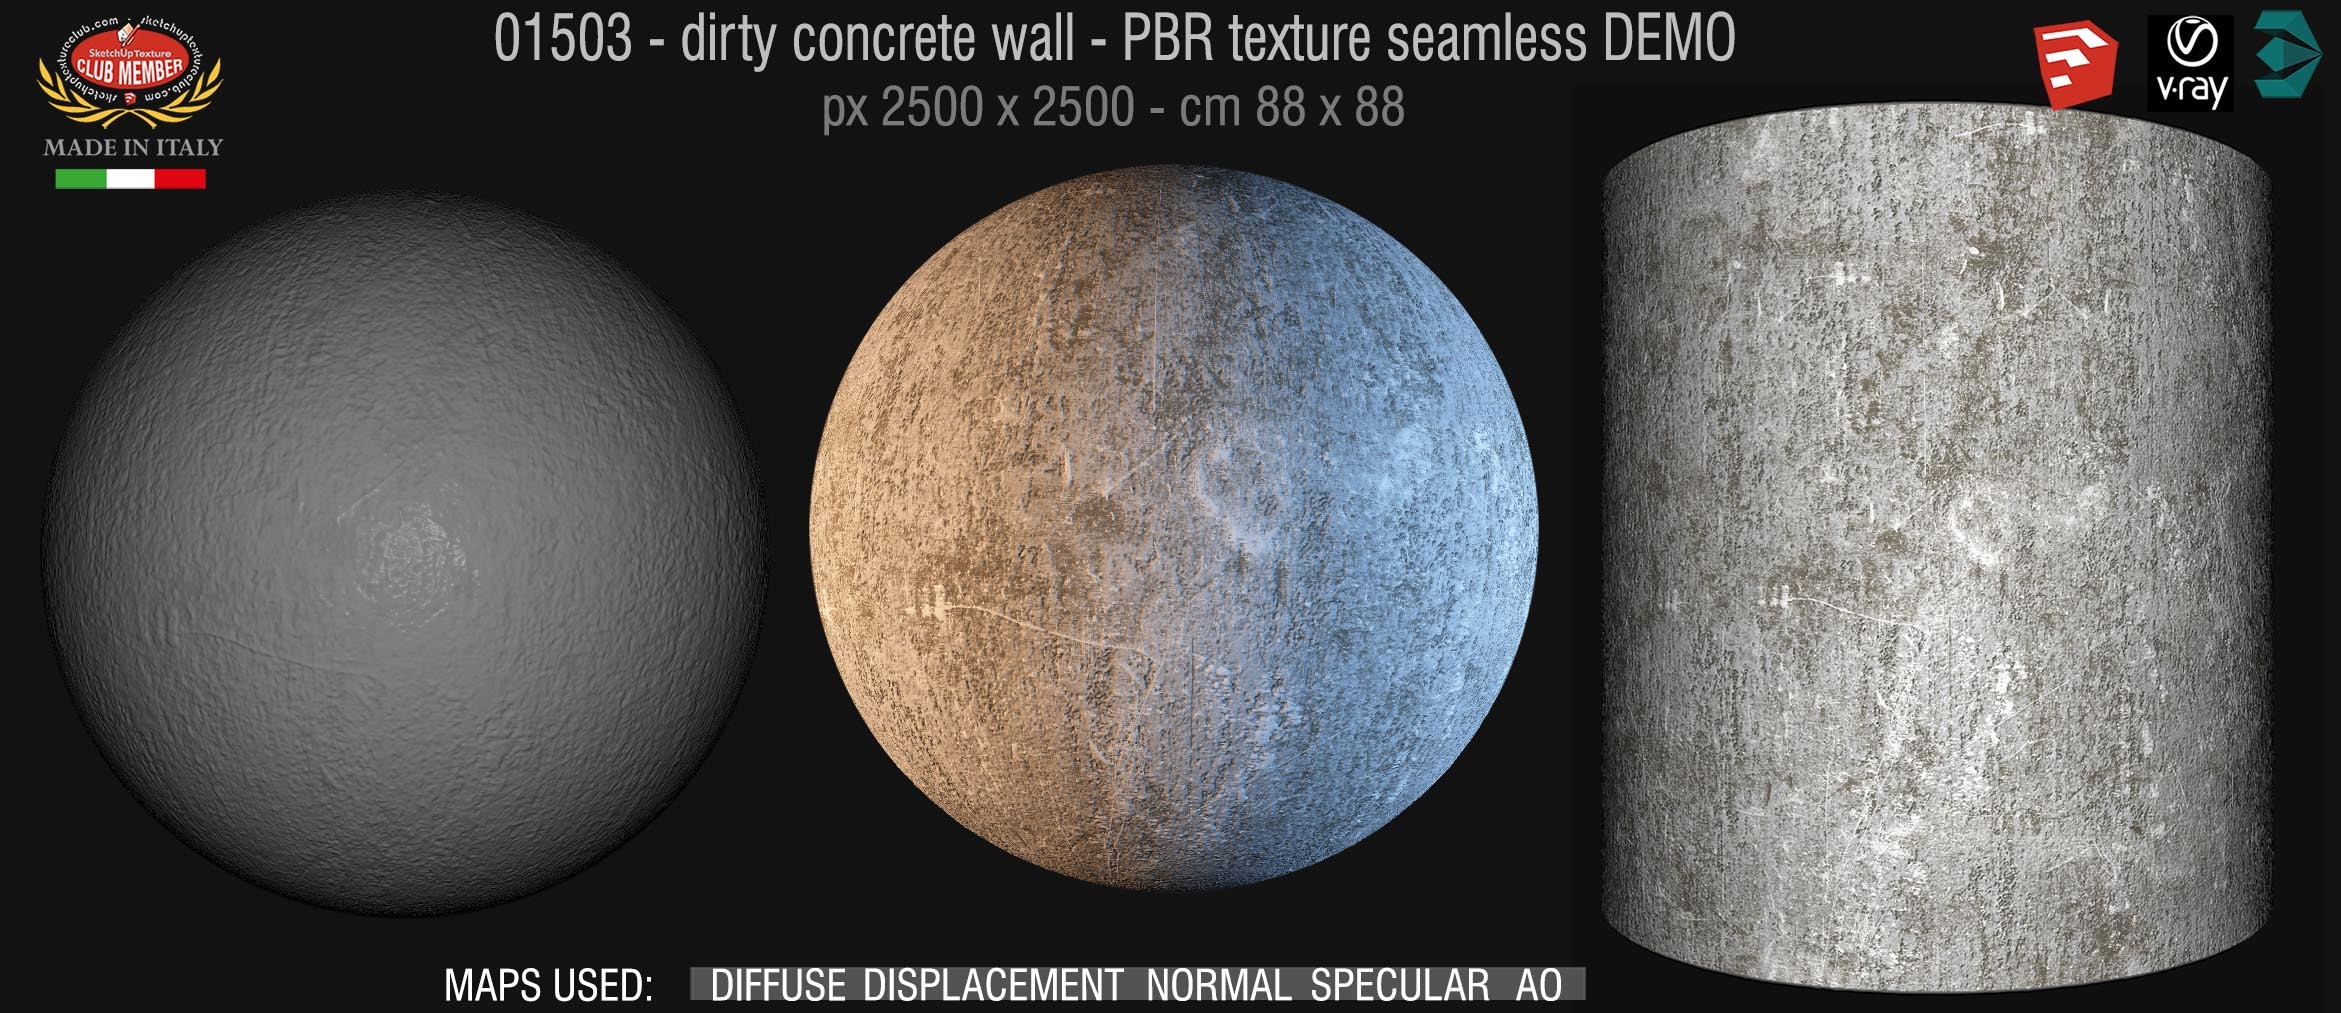 01503 Concrete bare dirty wall PBR texture seamless DEMO